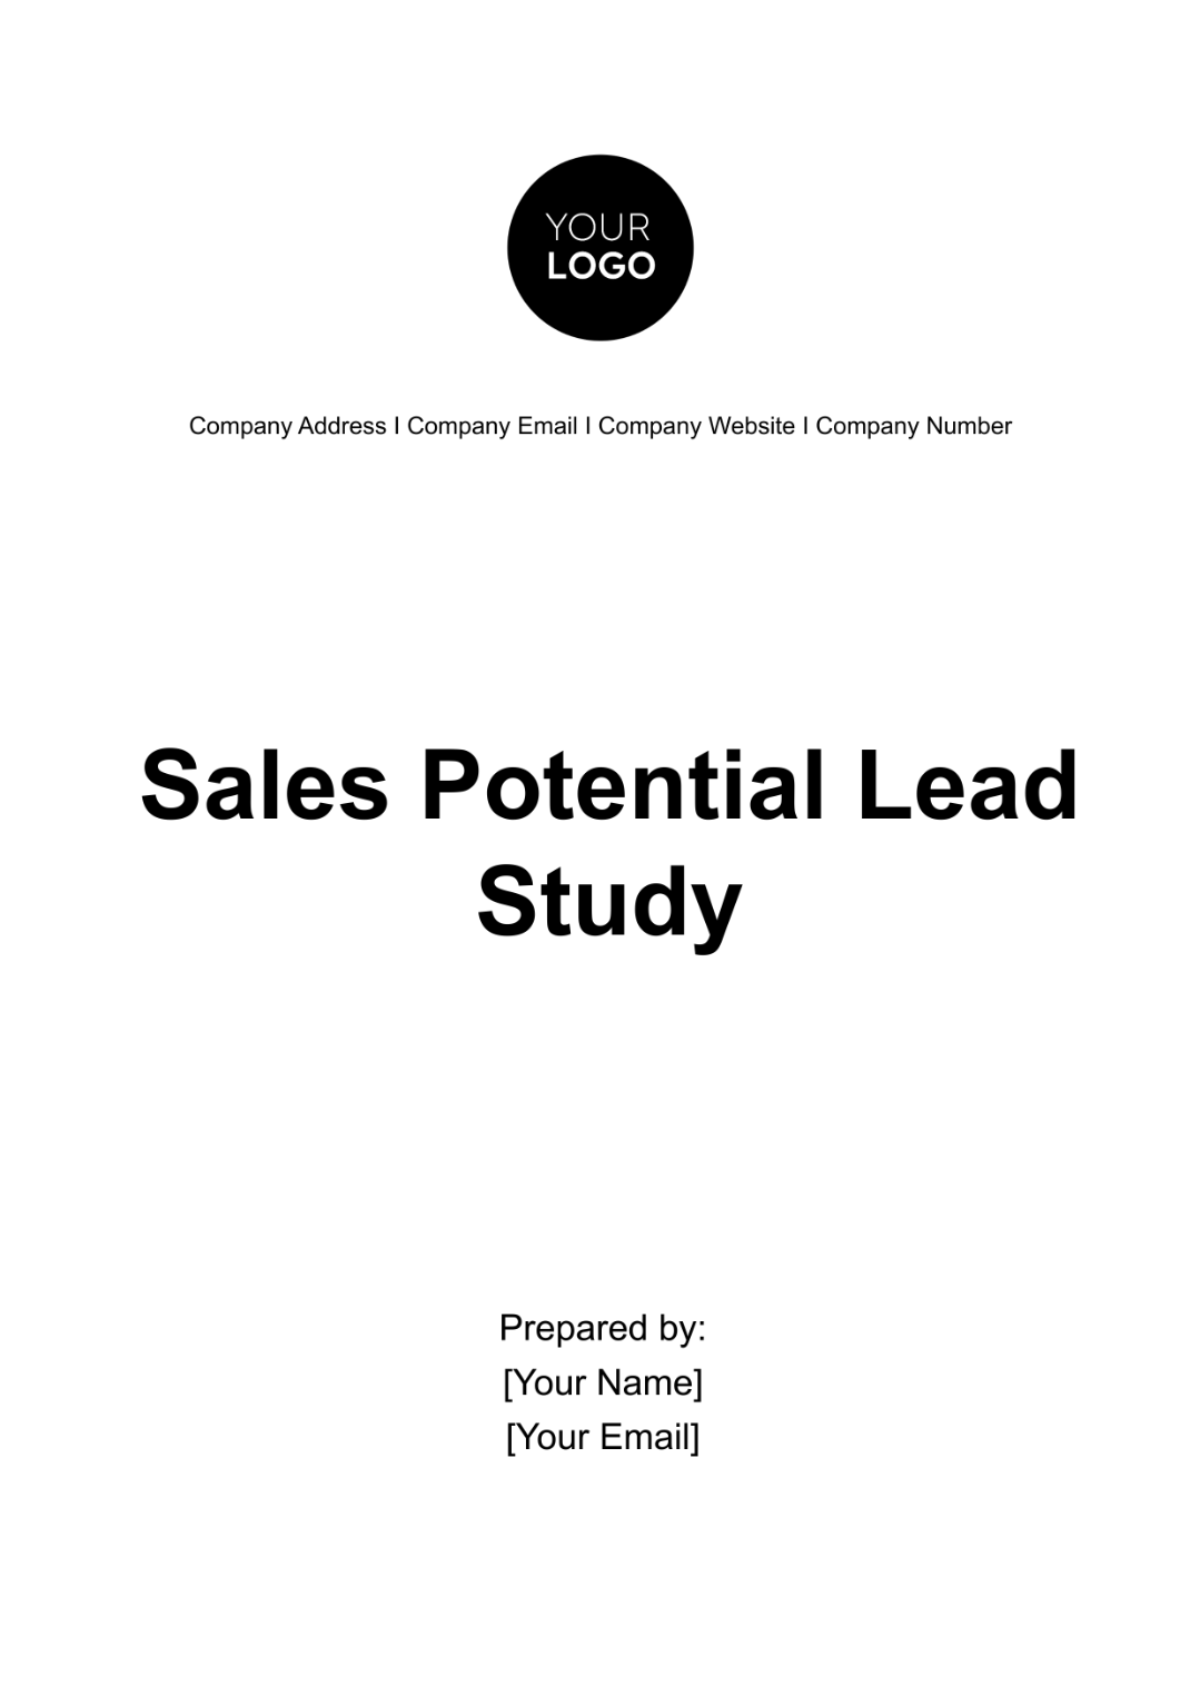 Sales Potential Lead Study Template